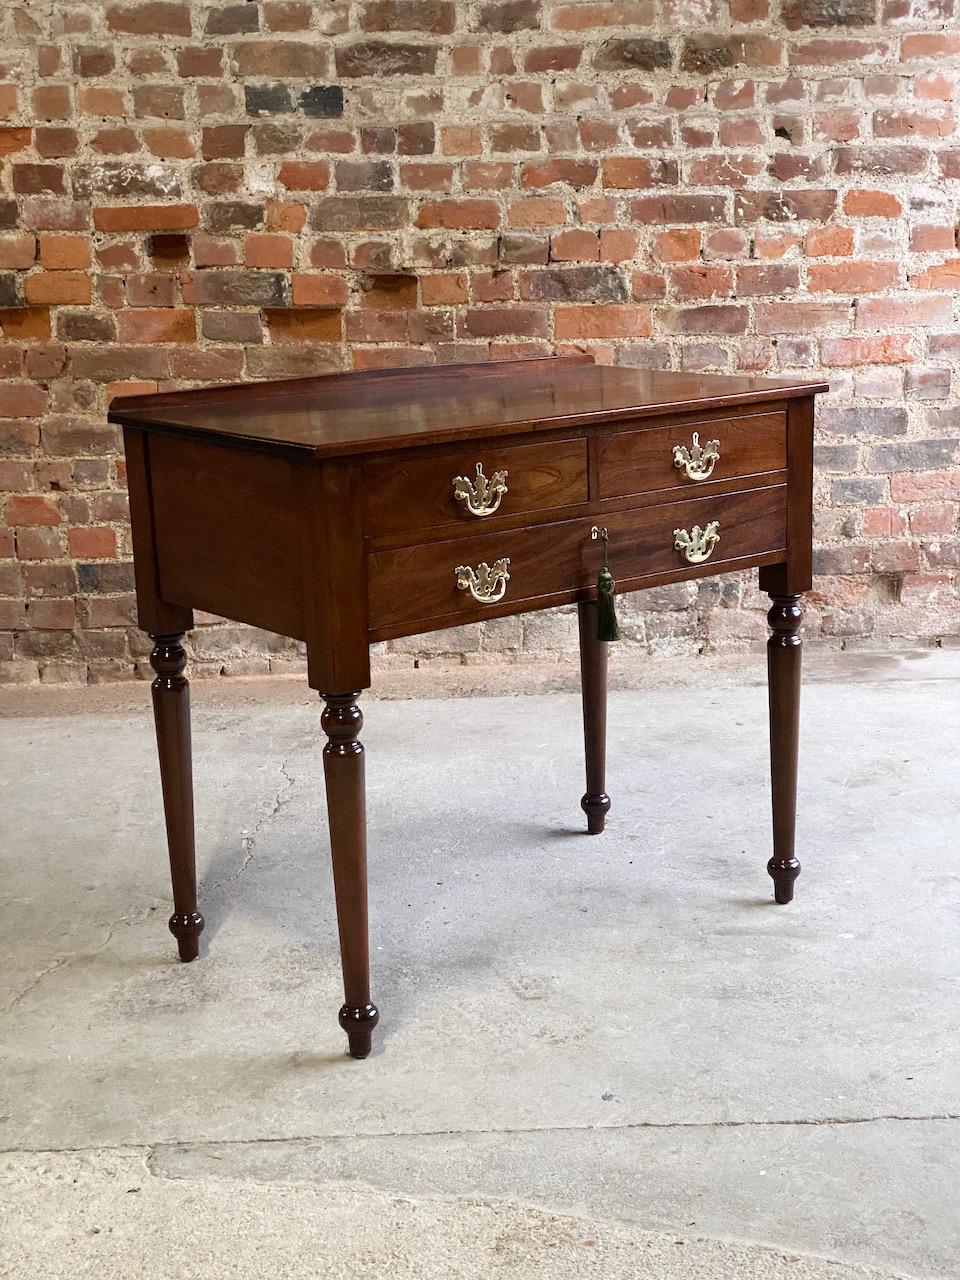 Elegant early 19th century George III Gillows attributed Cuban mahogany ‘Low Boy’ side table Secretaire with stamped Cope & Collinson brass locks circa 1820, the rectangular top over two short drawers and one long drawer incorporating a secretaire